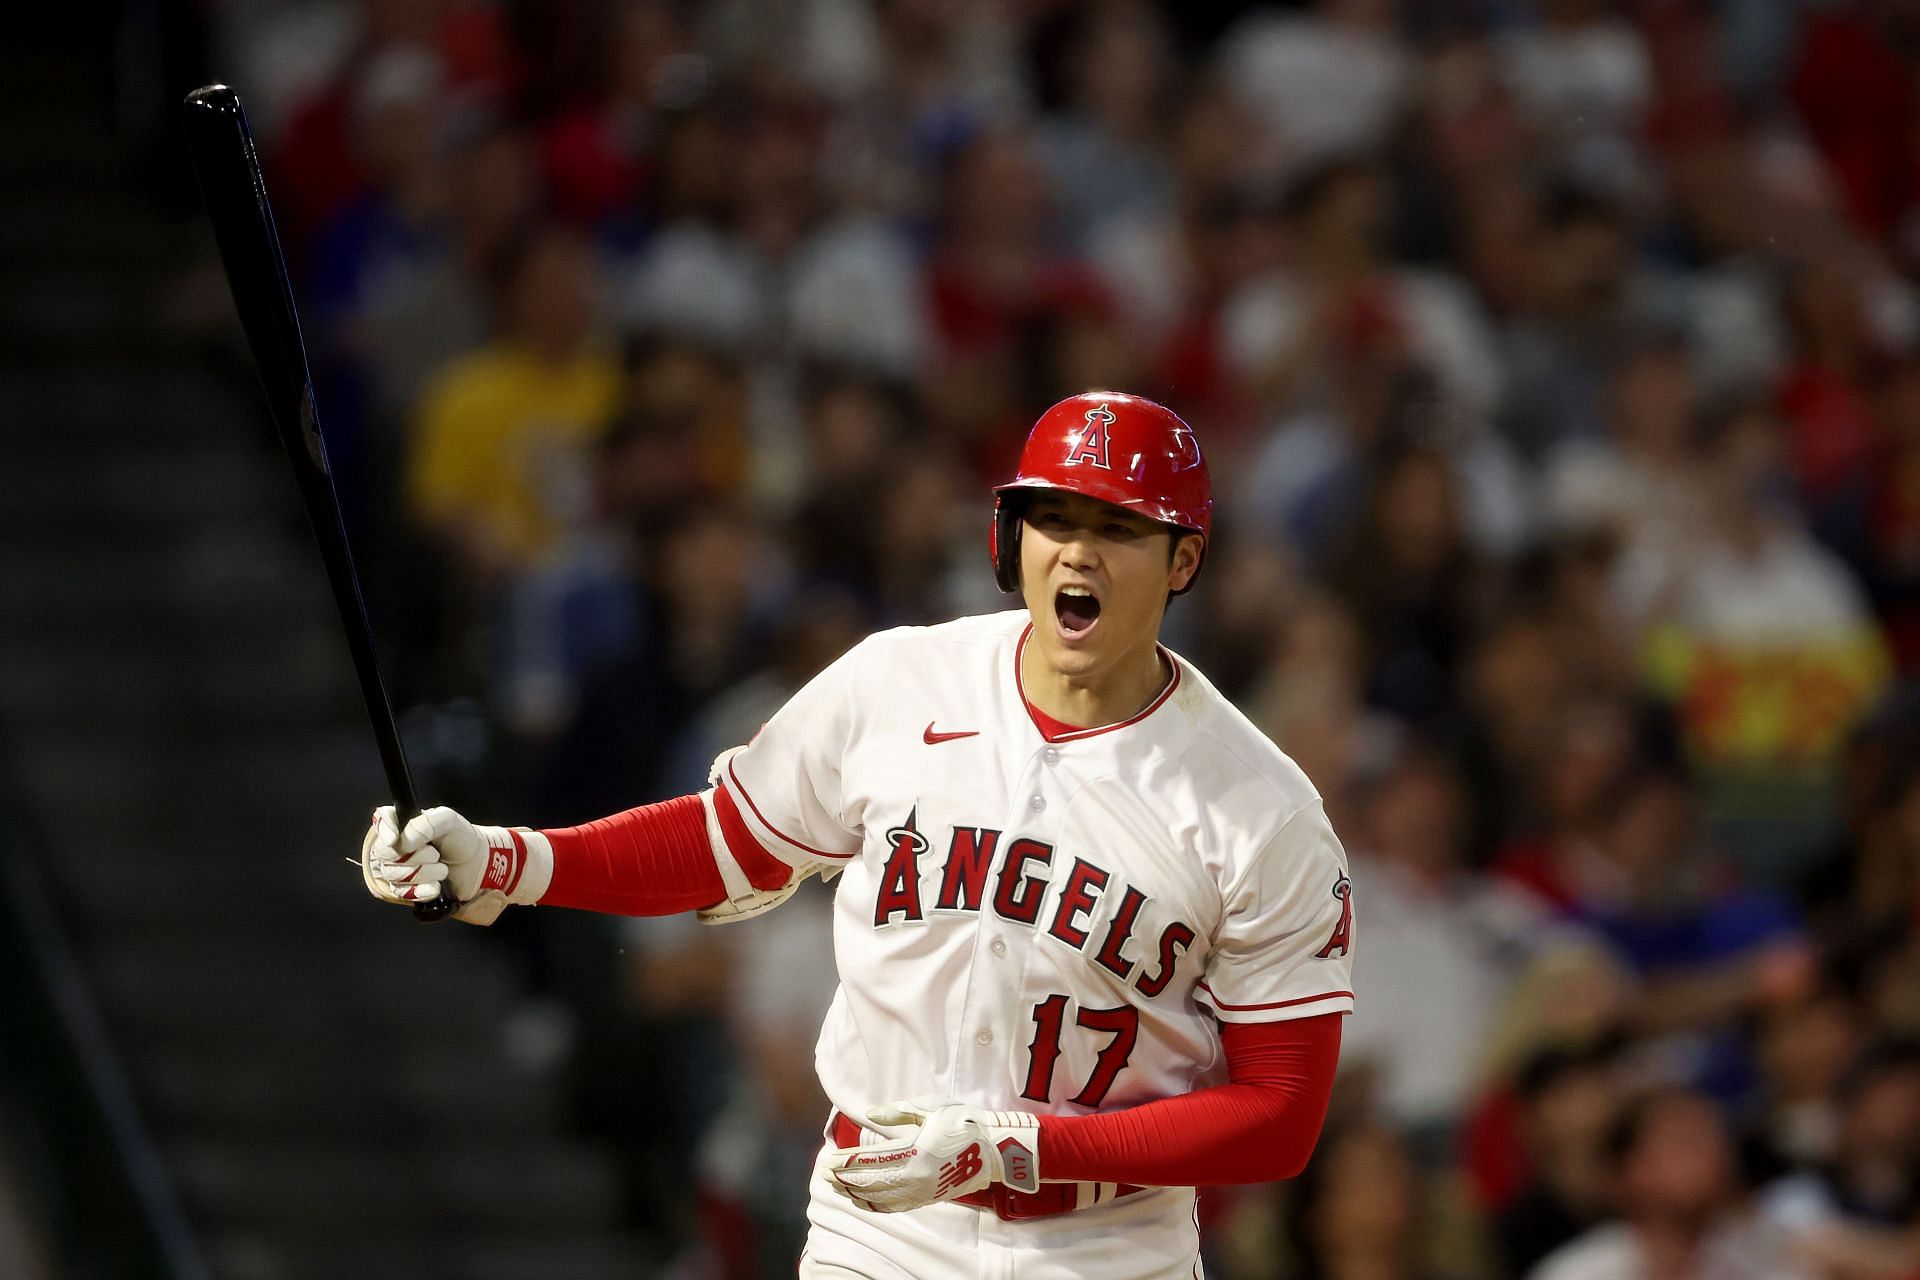 Shohei Ohtani reacts after flying out during a game against the Los Angeles Dodgers at Angel Stadium of Anaheim